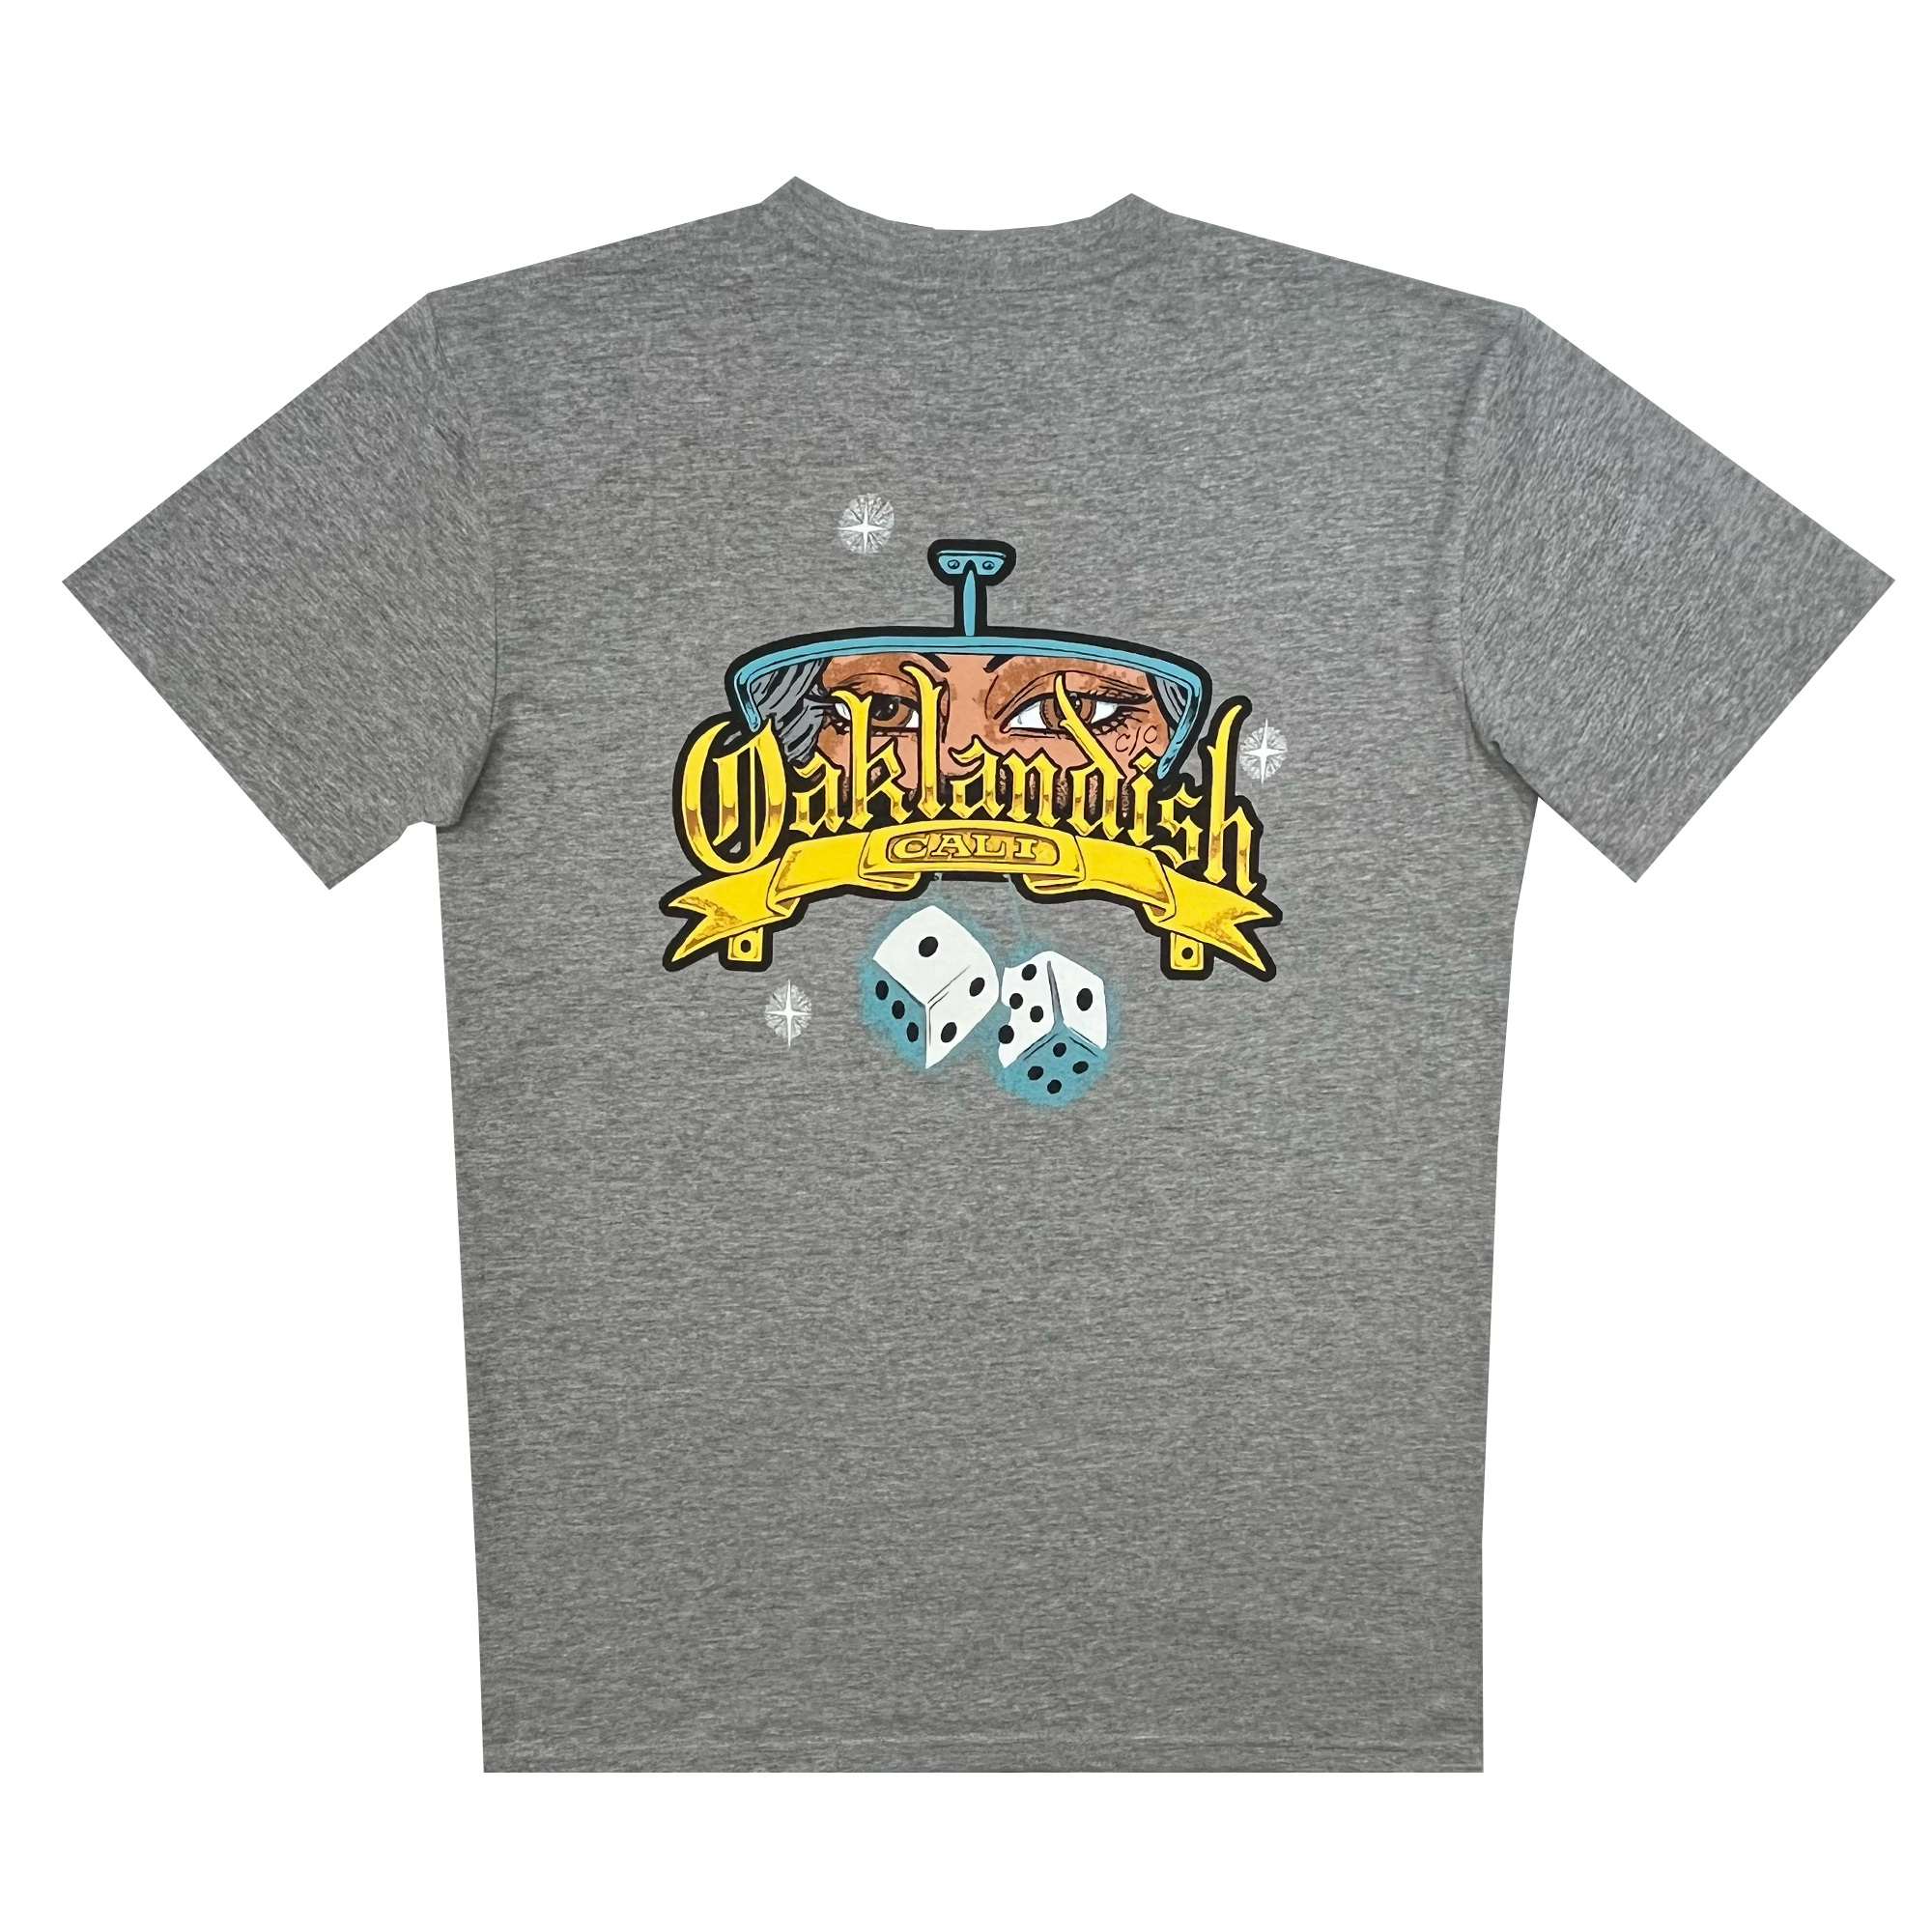 The backside of a heather grey t-shirt with Oakland Crusin' graphic featuring a stylized rear view mirror and hanging dice.